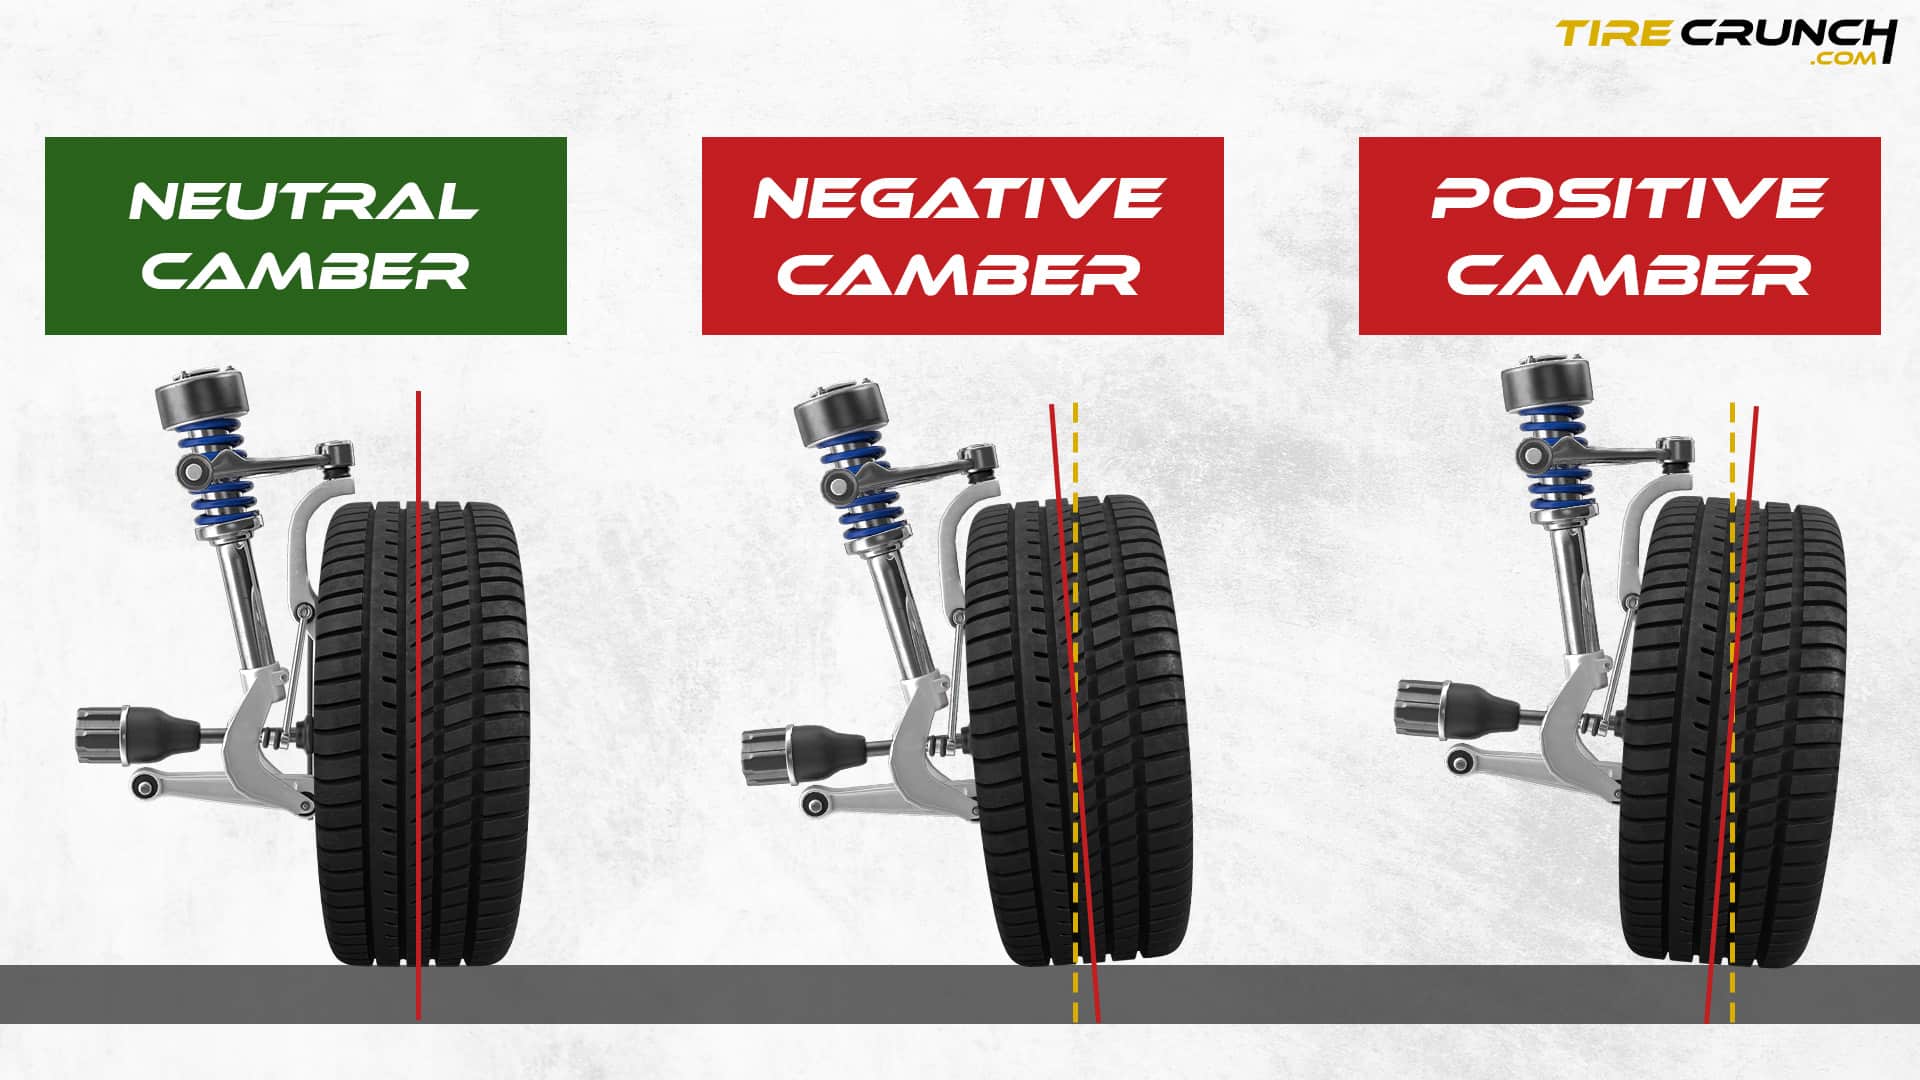 Wheel Alignment: Examples of correct and Incorrect Camber